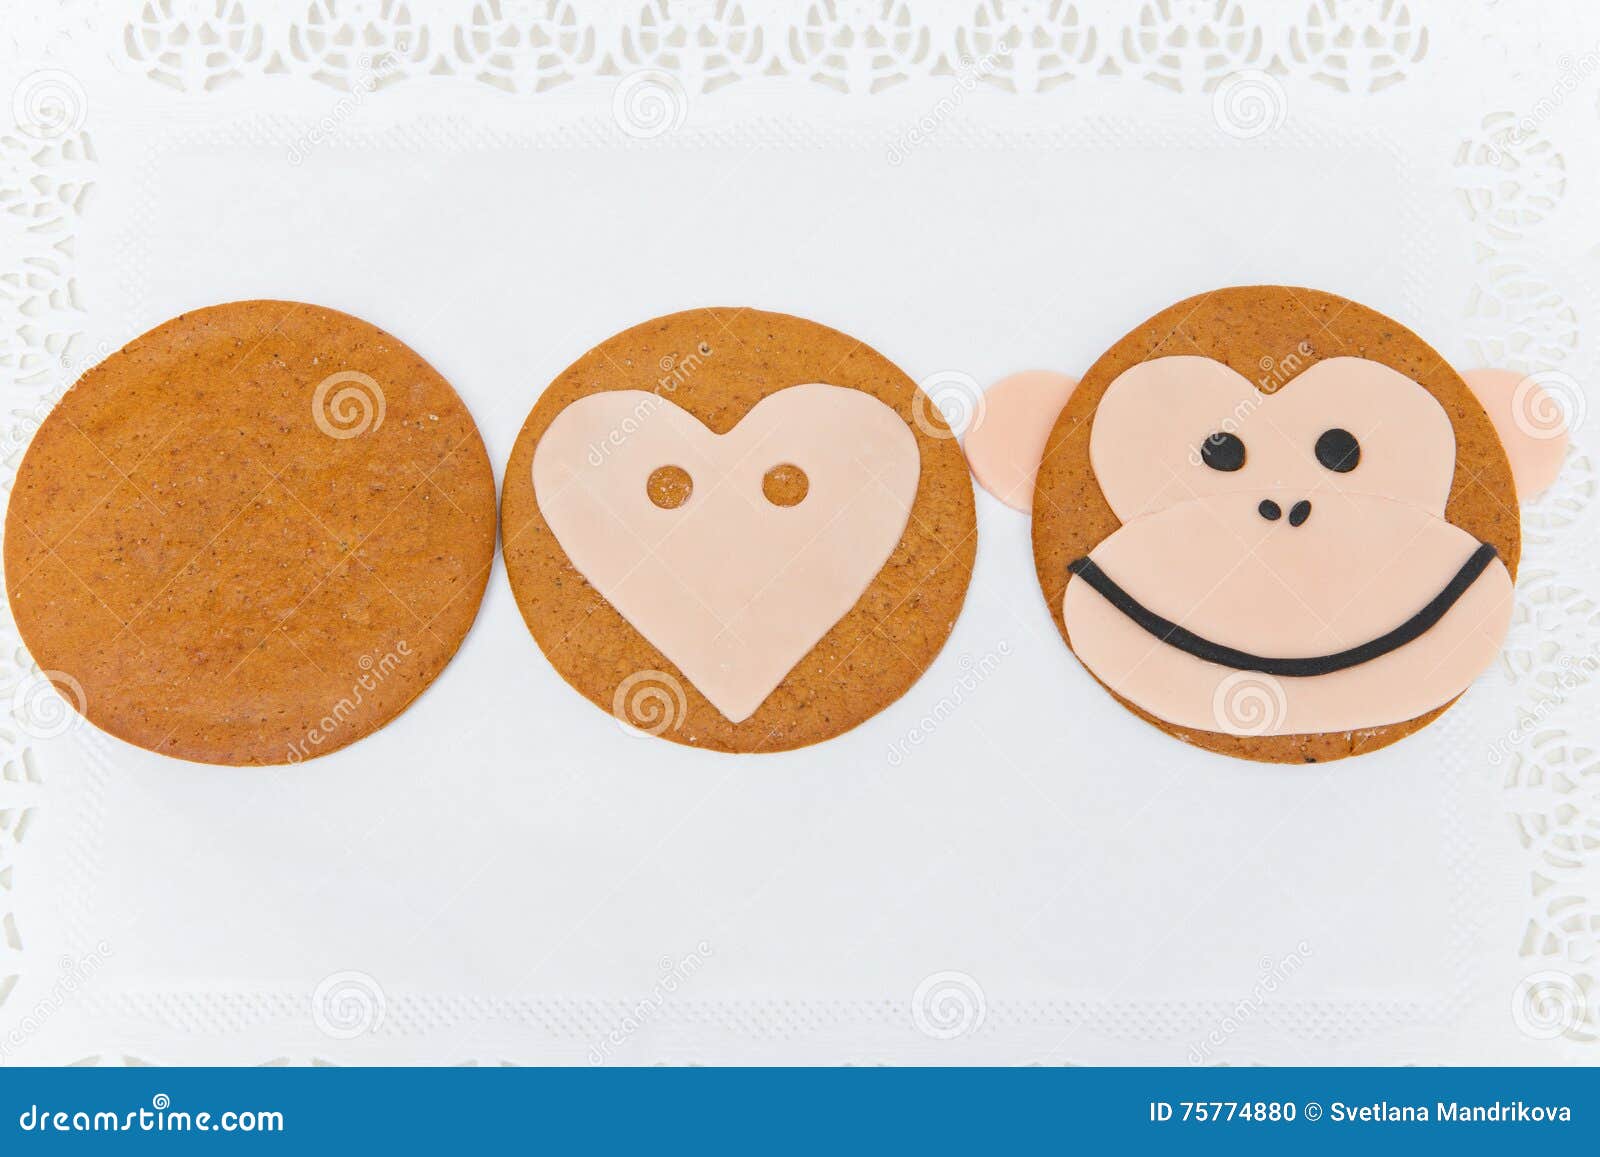 monkey  ginger cookie